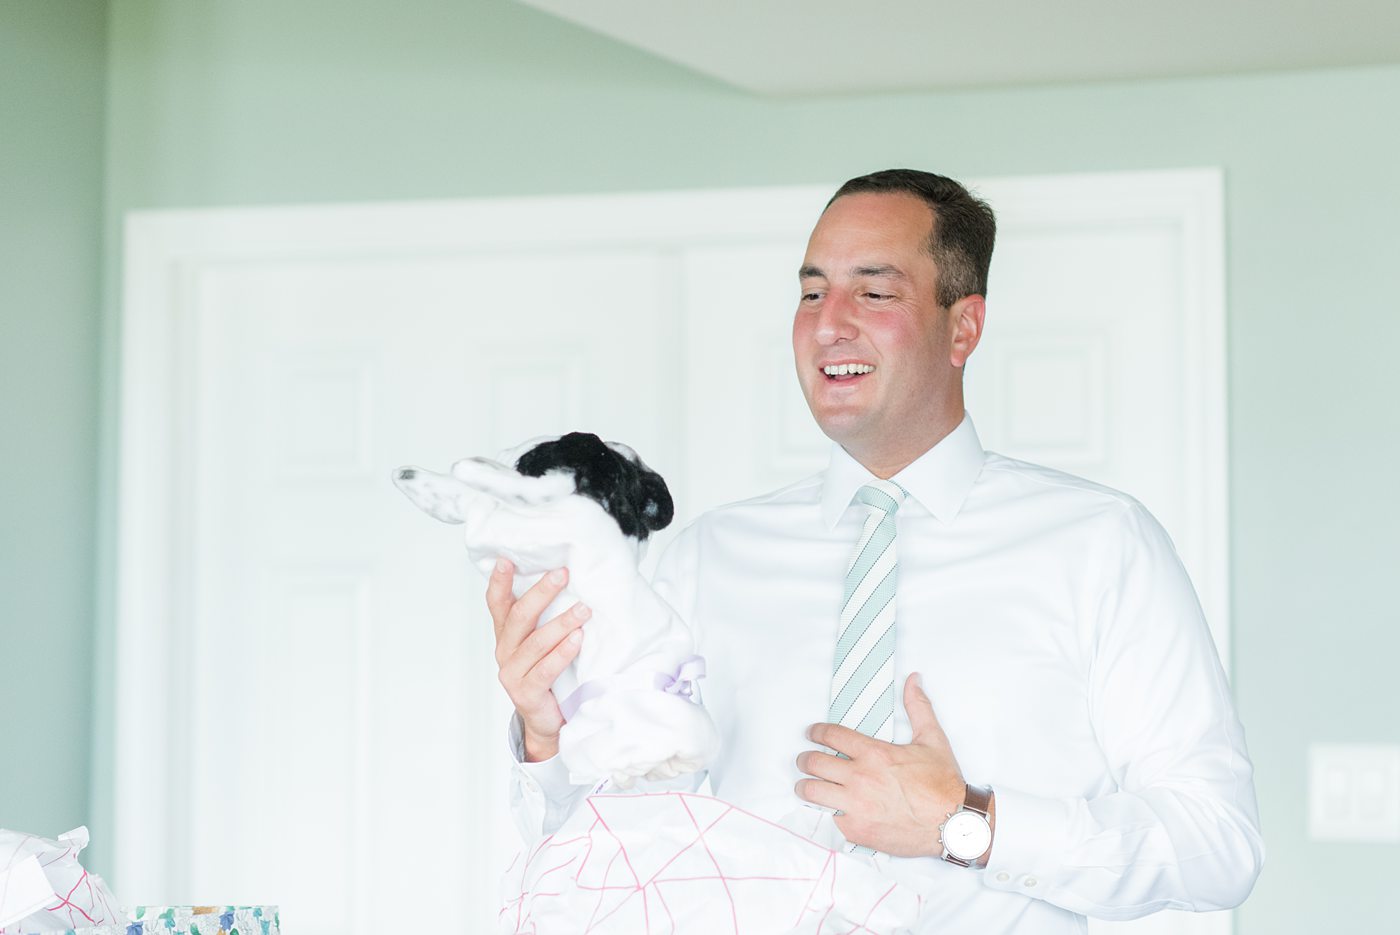 Pictures of the groom getting ready and opening his unique golf-cover gift, customized to look like the bride and groom's dog, on their their wedding day. Their Saratoga Springs destination wedding photos in upstate New York are by Mikkel Paige Photography, NY wedding photographer. #mikkelpaige #saratogaspringswedding #destinationwedding #groomgift #golfcover